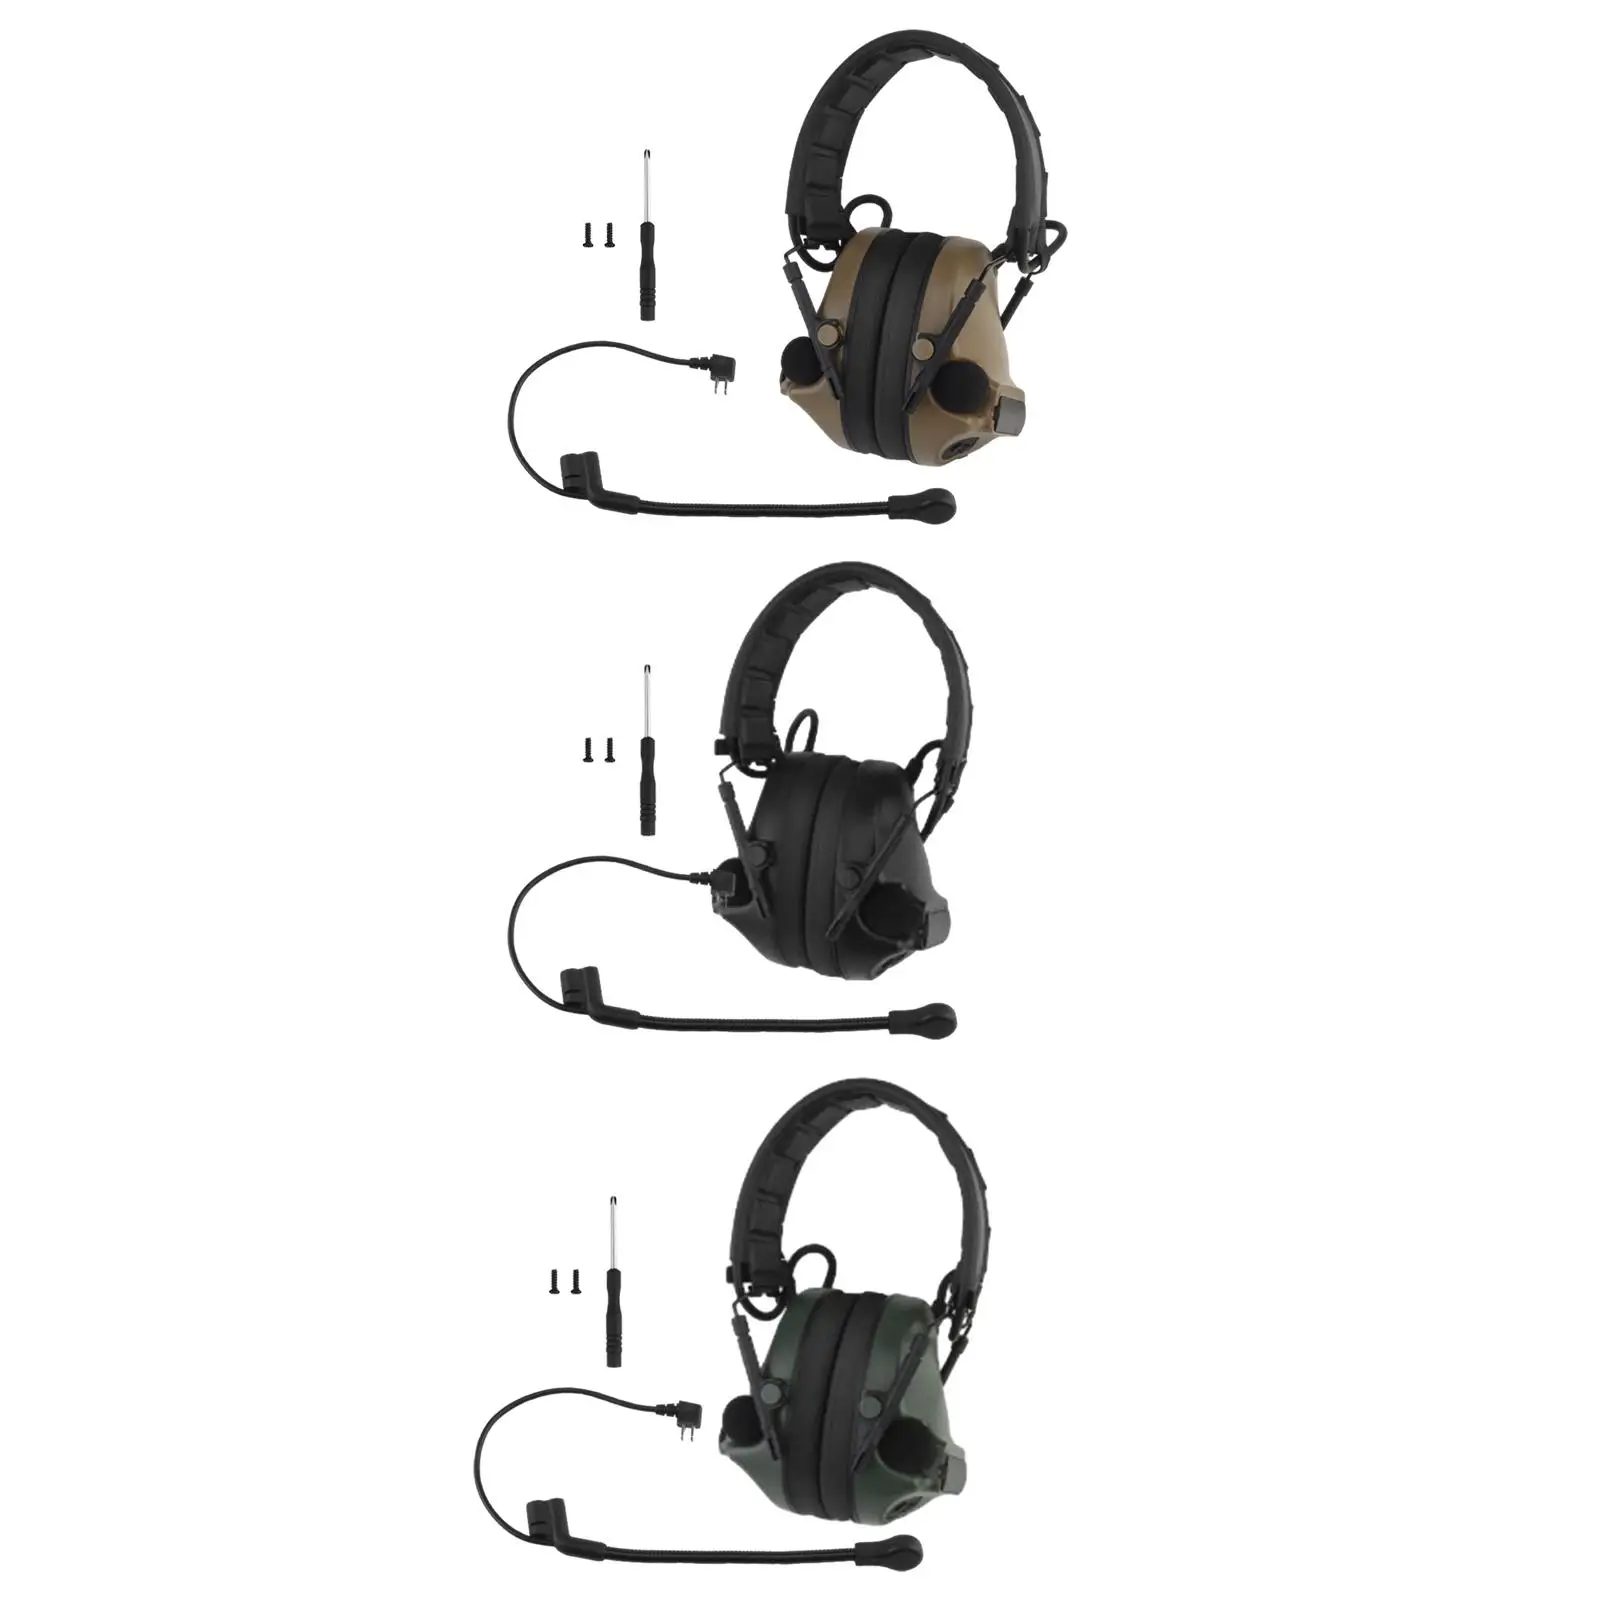 Hearing Protectors Lightweight Ear Covers Earphones Compact Soft Comfortable Ear Cups for Mowing Travel Studying Office Sleeping